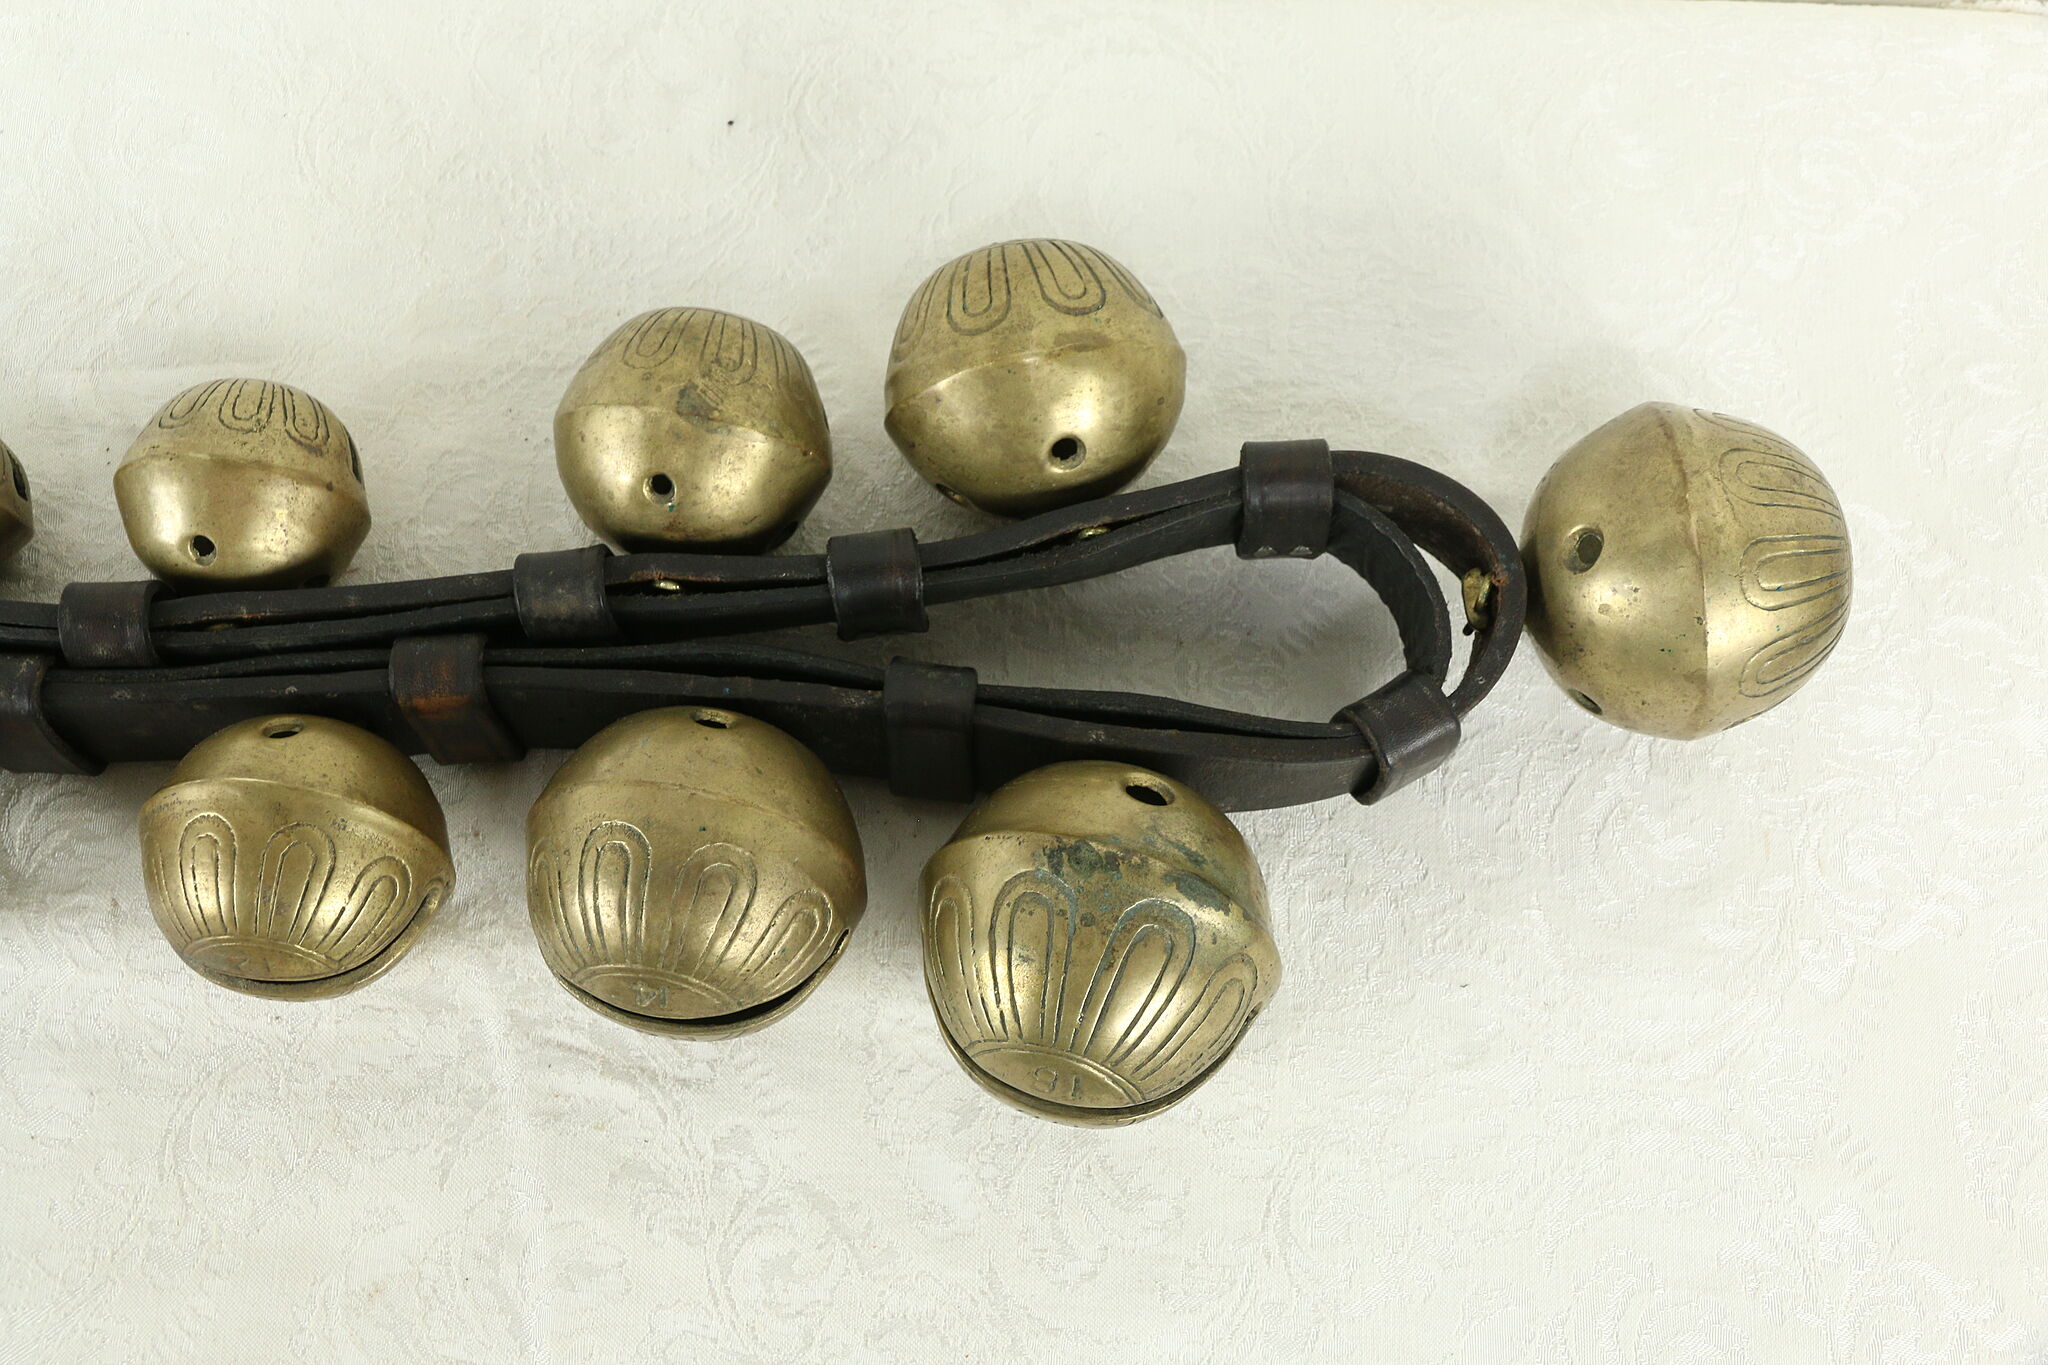 Victorian Antique Sleigh Bells Set Size 1-15 on 7' Leather Harness